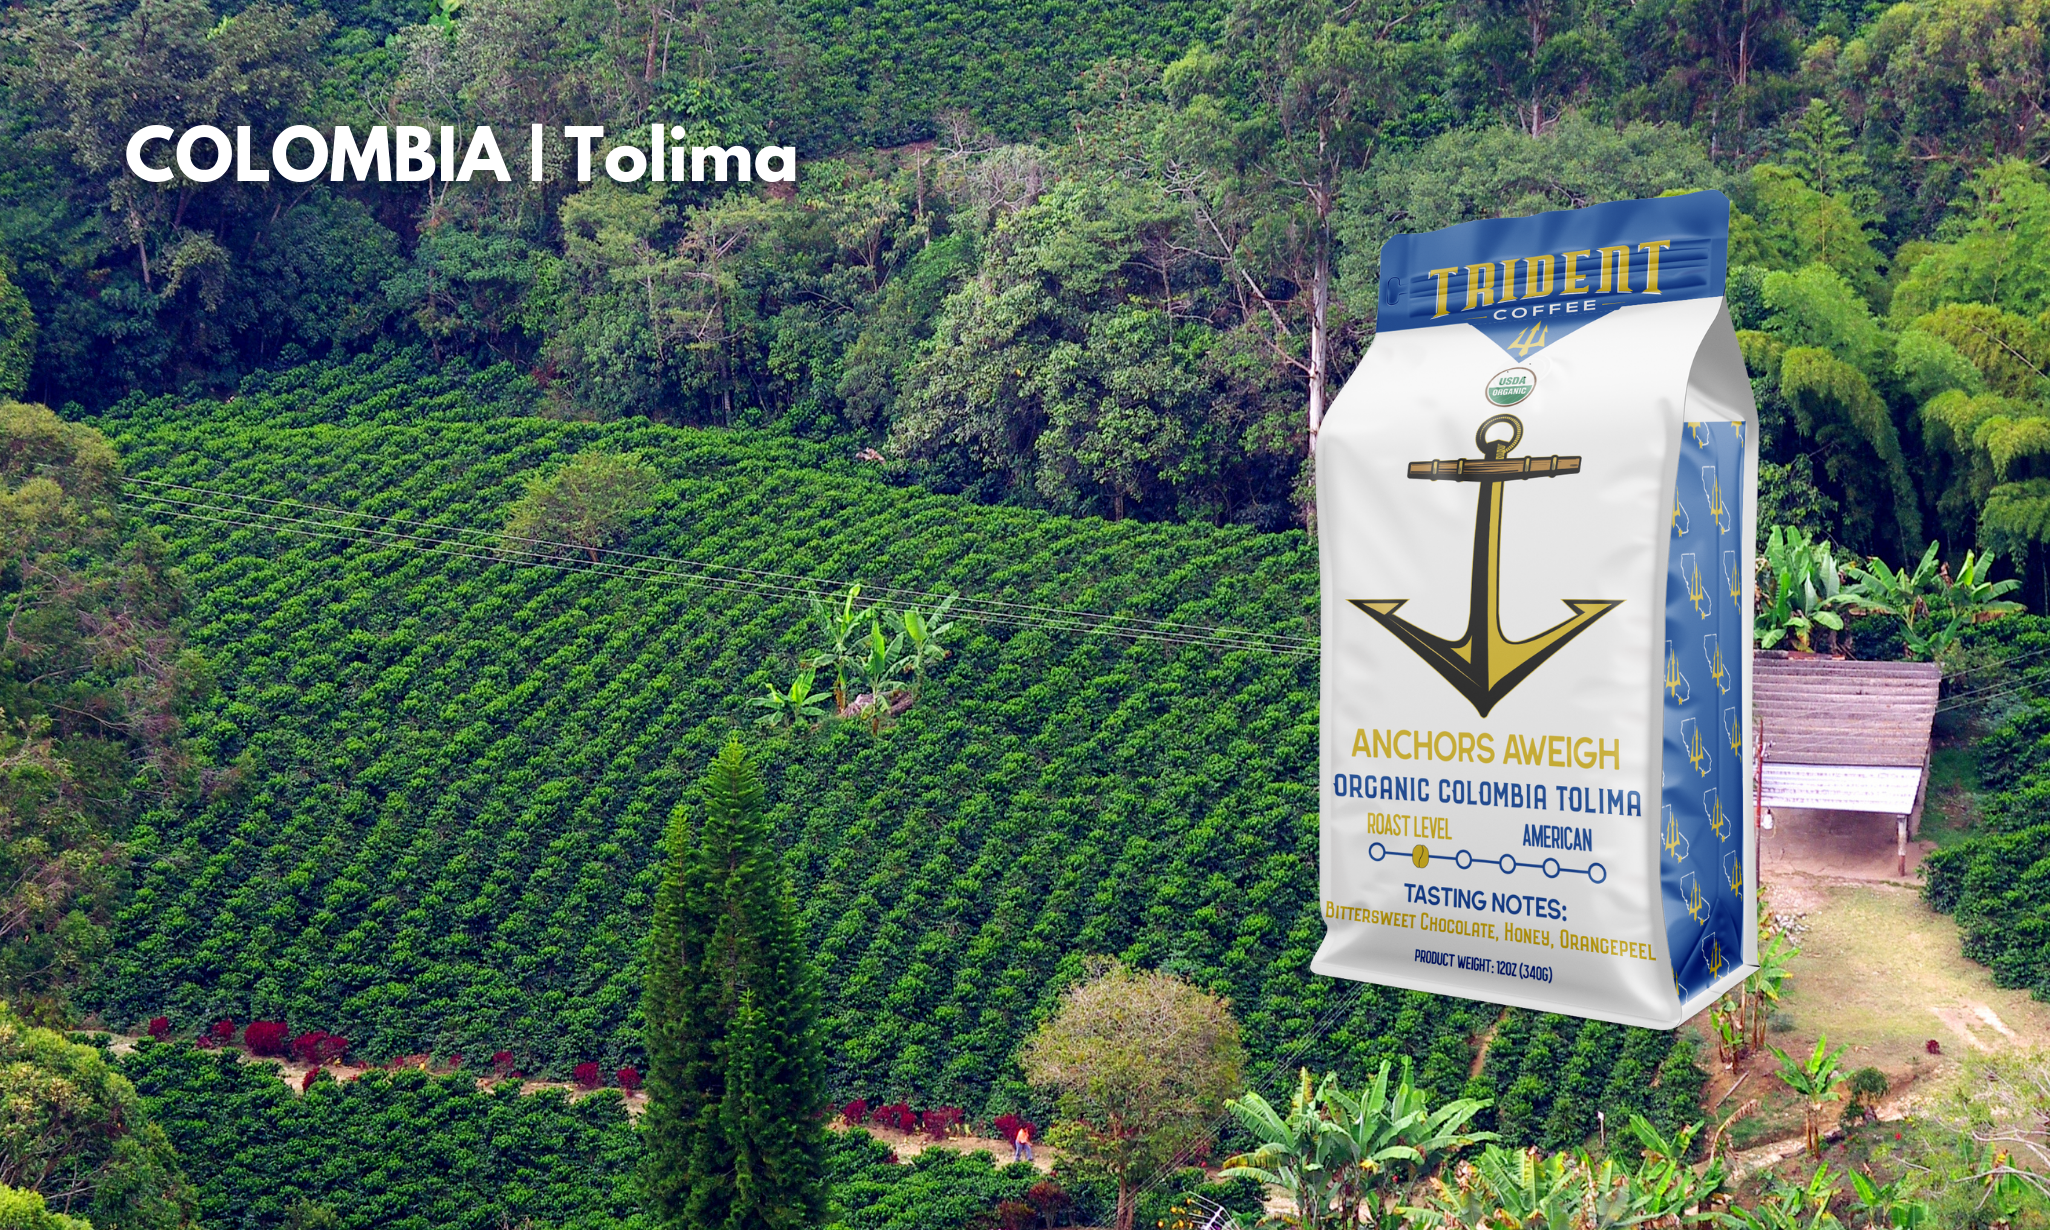 anchors aweigh - roasted coffee - trident - Colombia